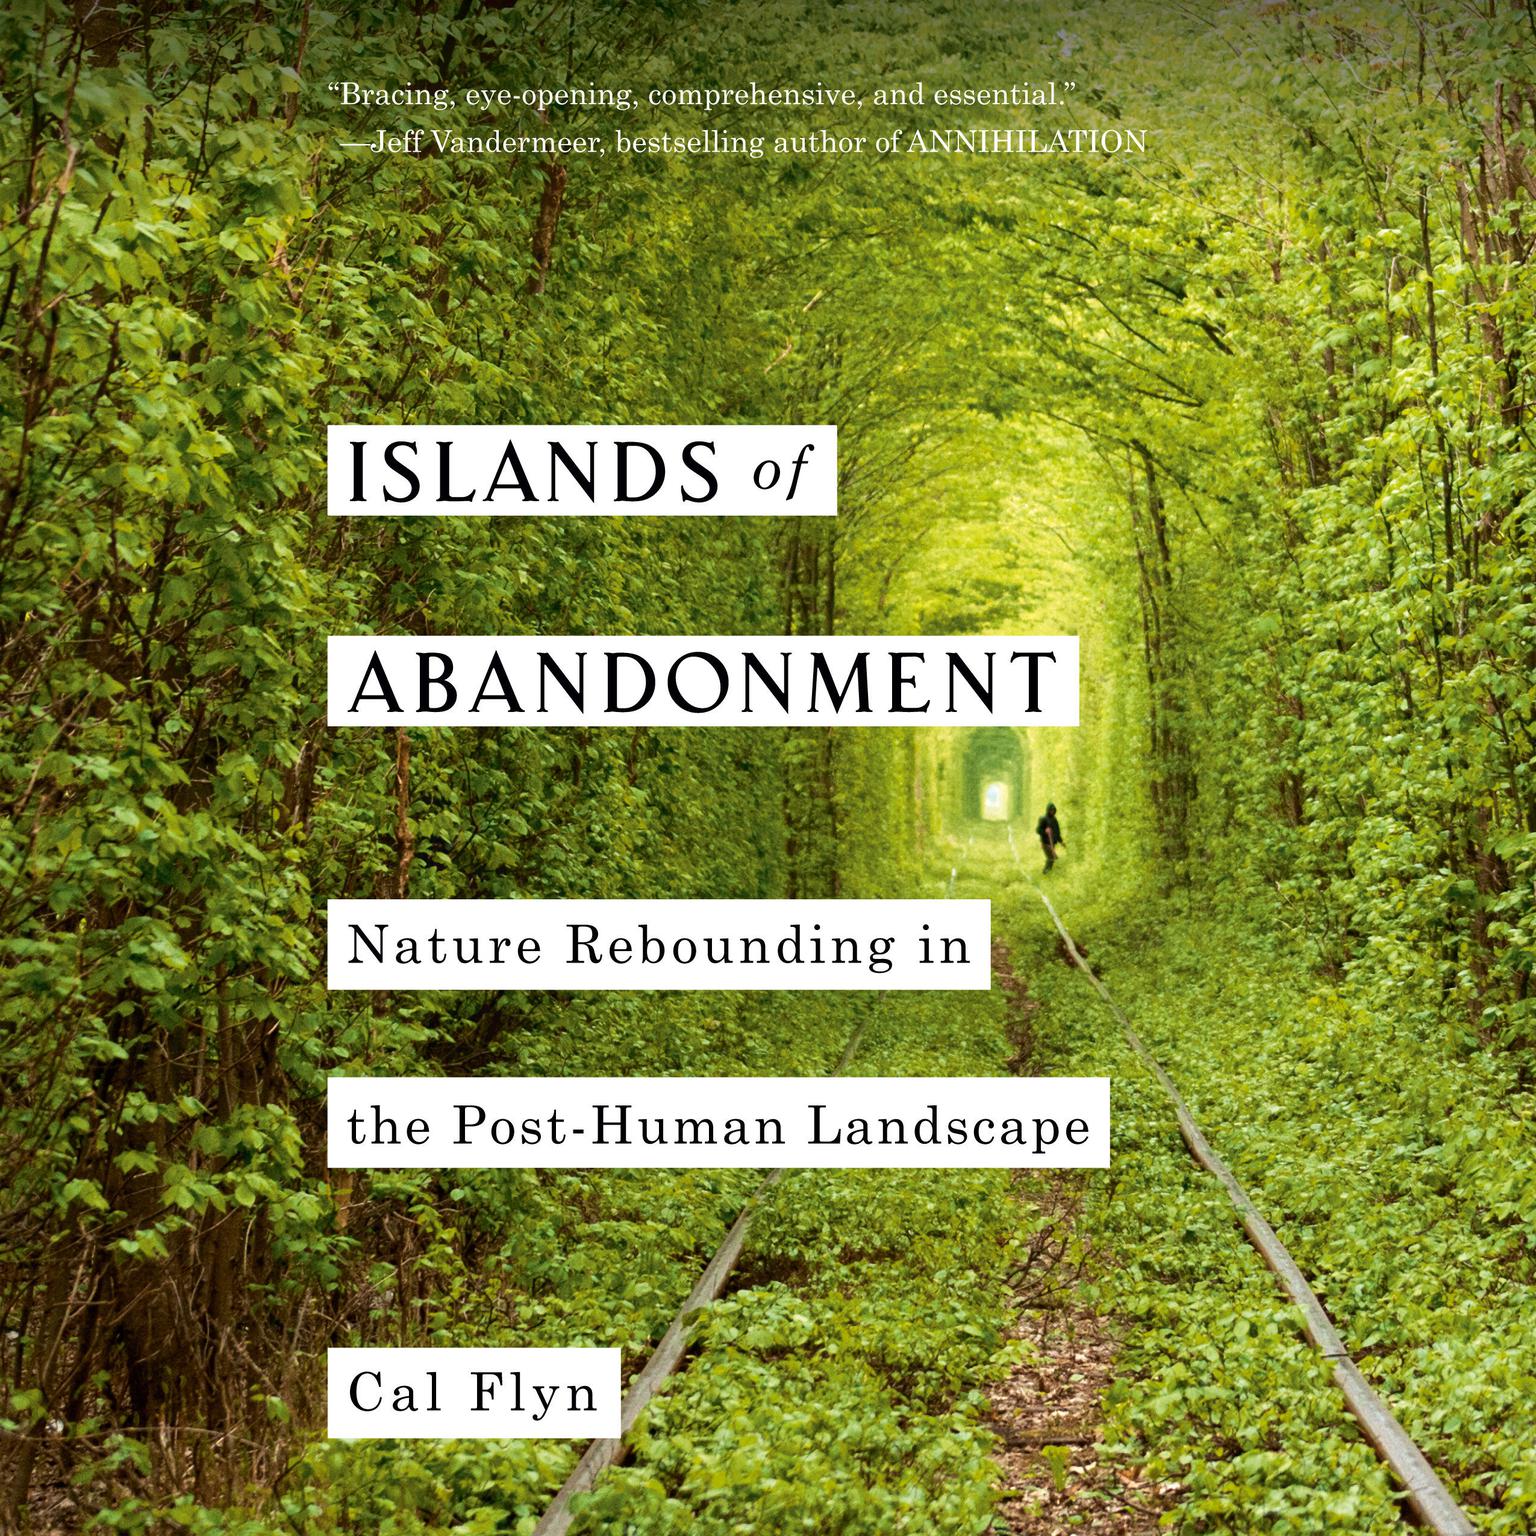 Islands of Abandonment: Nature Rebounding in the Post-Human Landscape Audiobook, by Cal Flyn